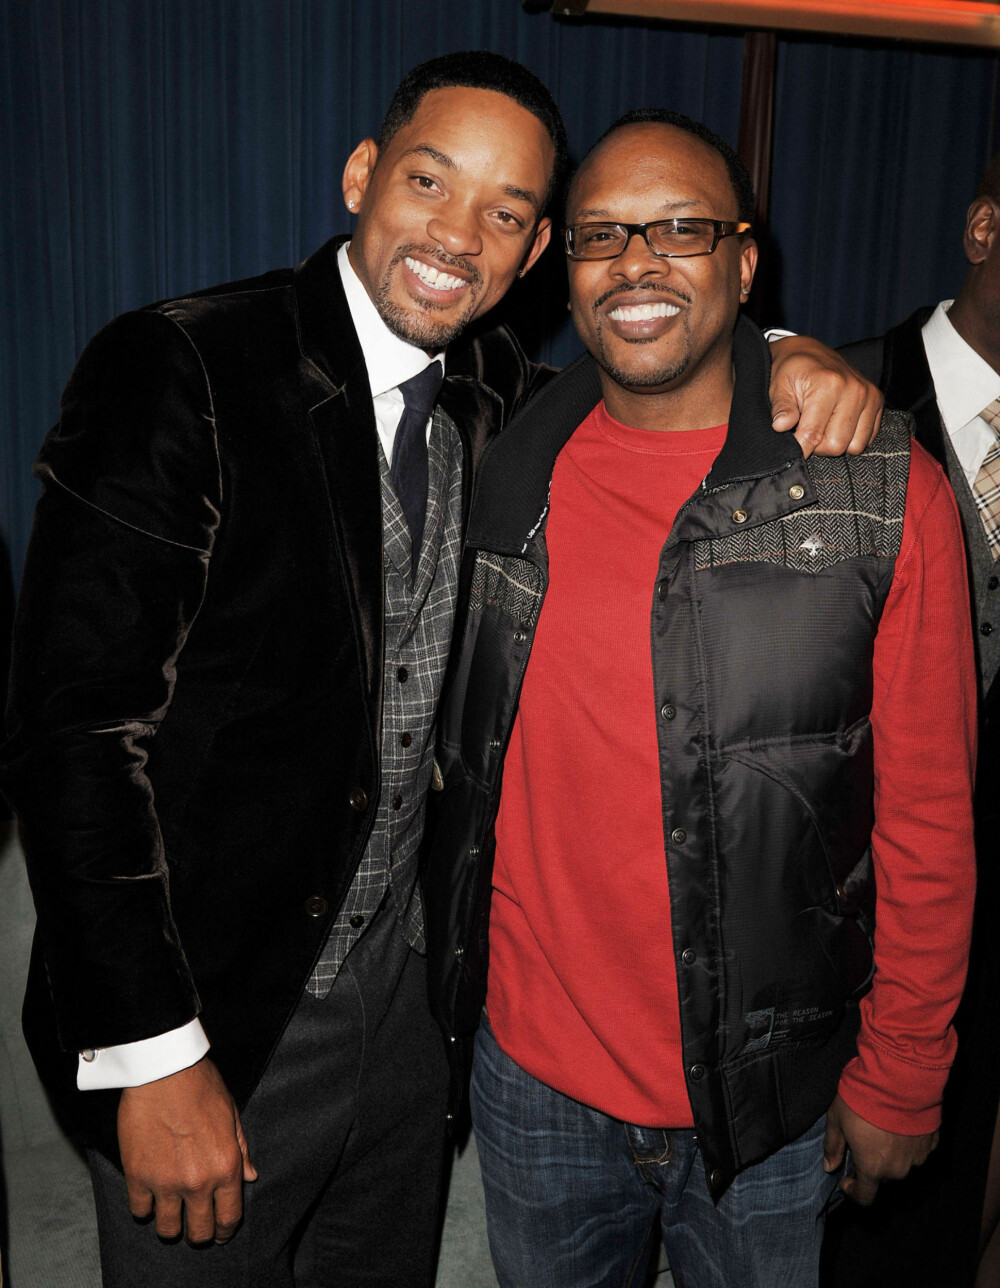 WILL SMITH OG JEFFREY TOWNES.